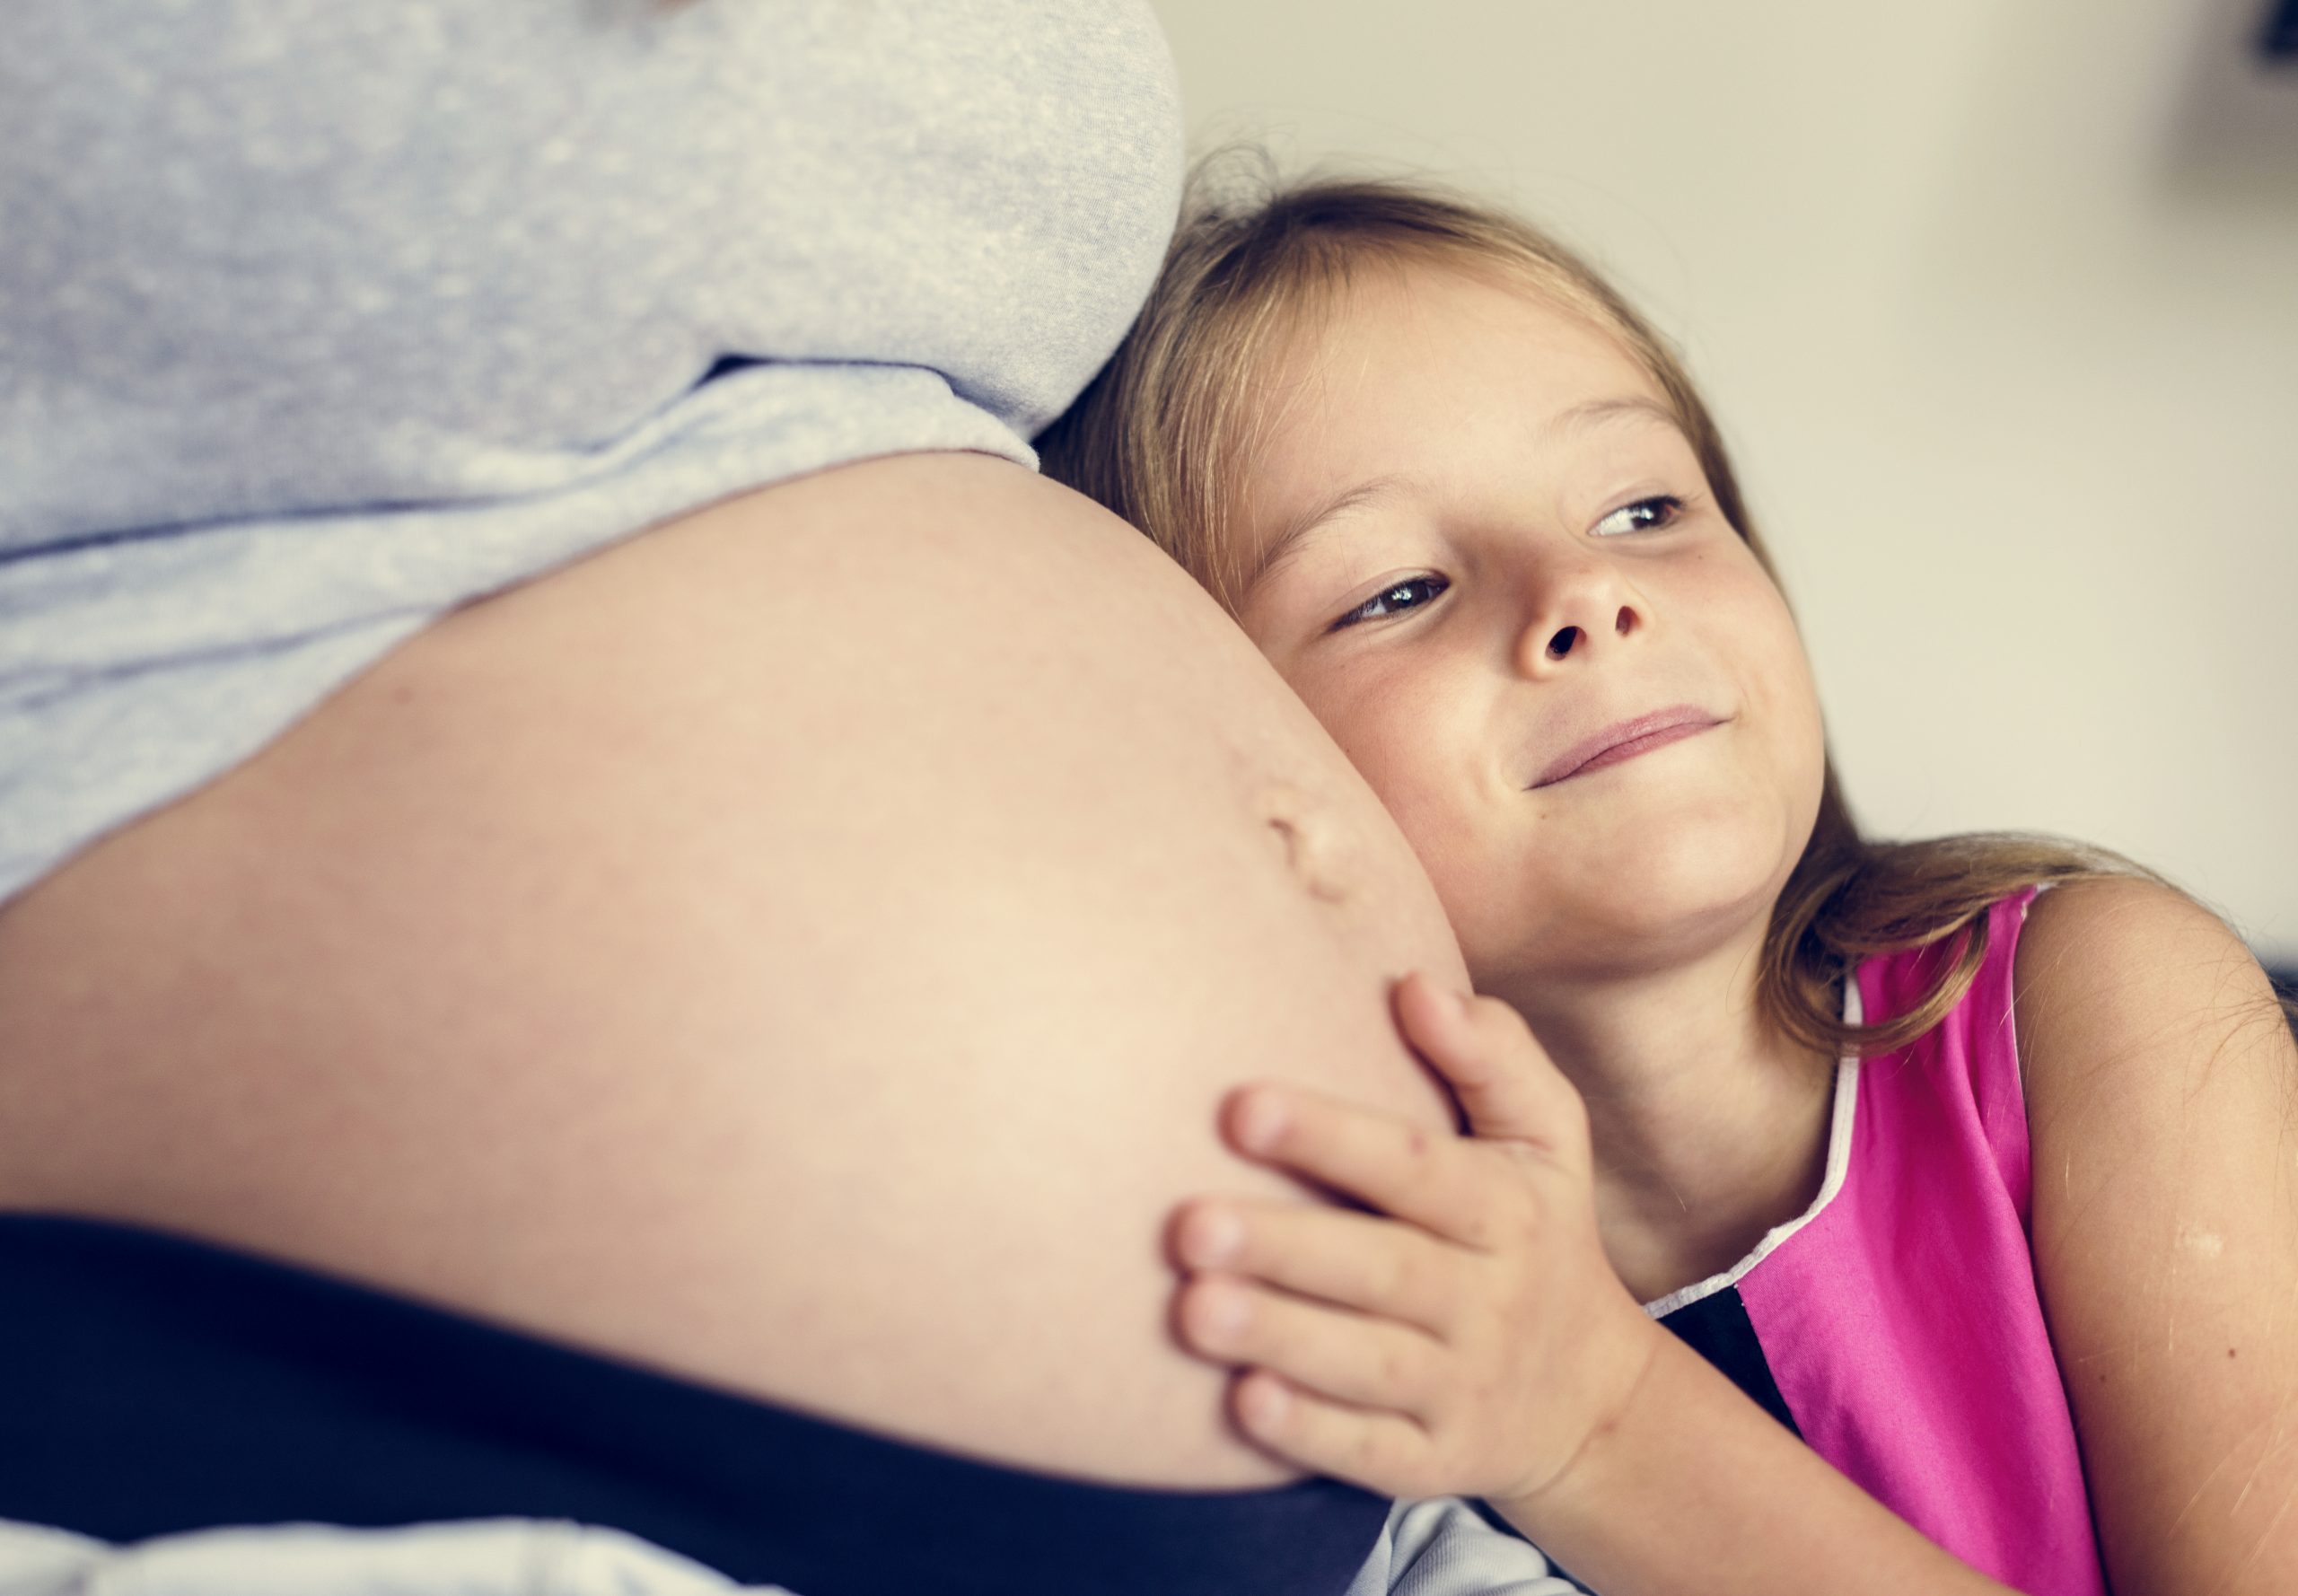 Child touching pregnant woman's stomach